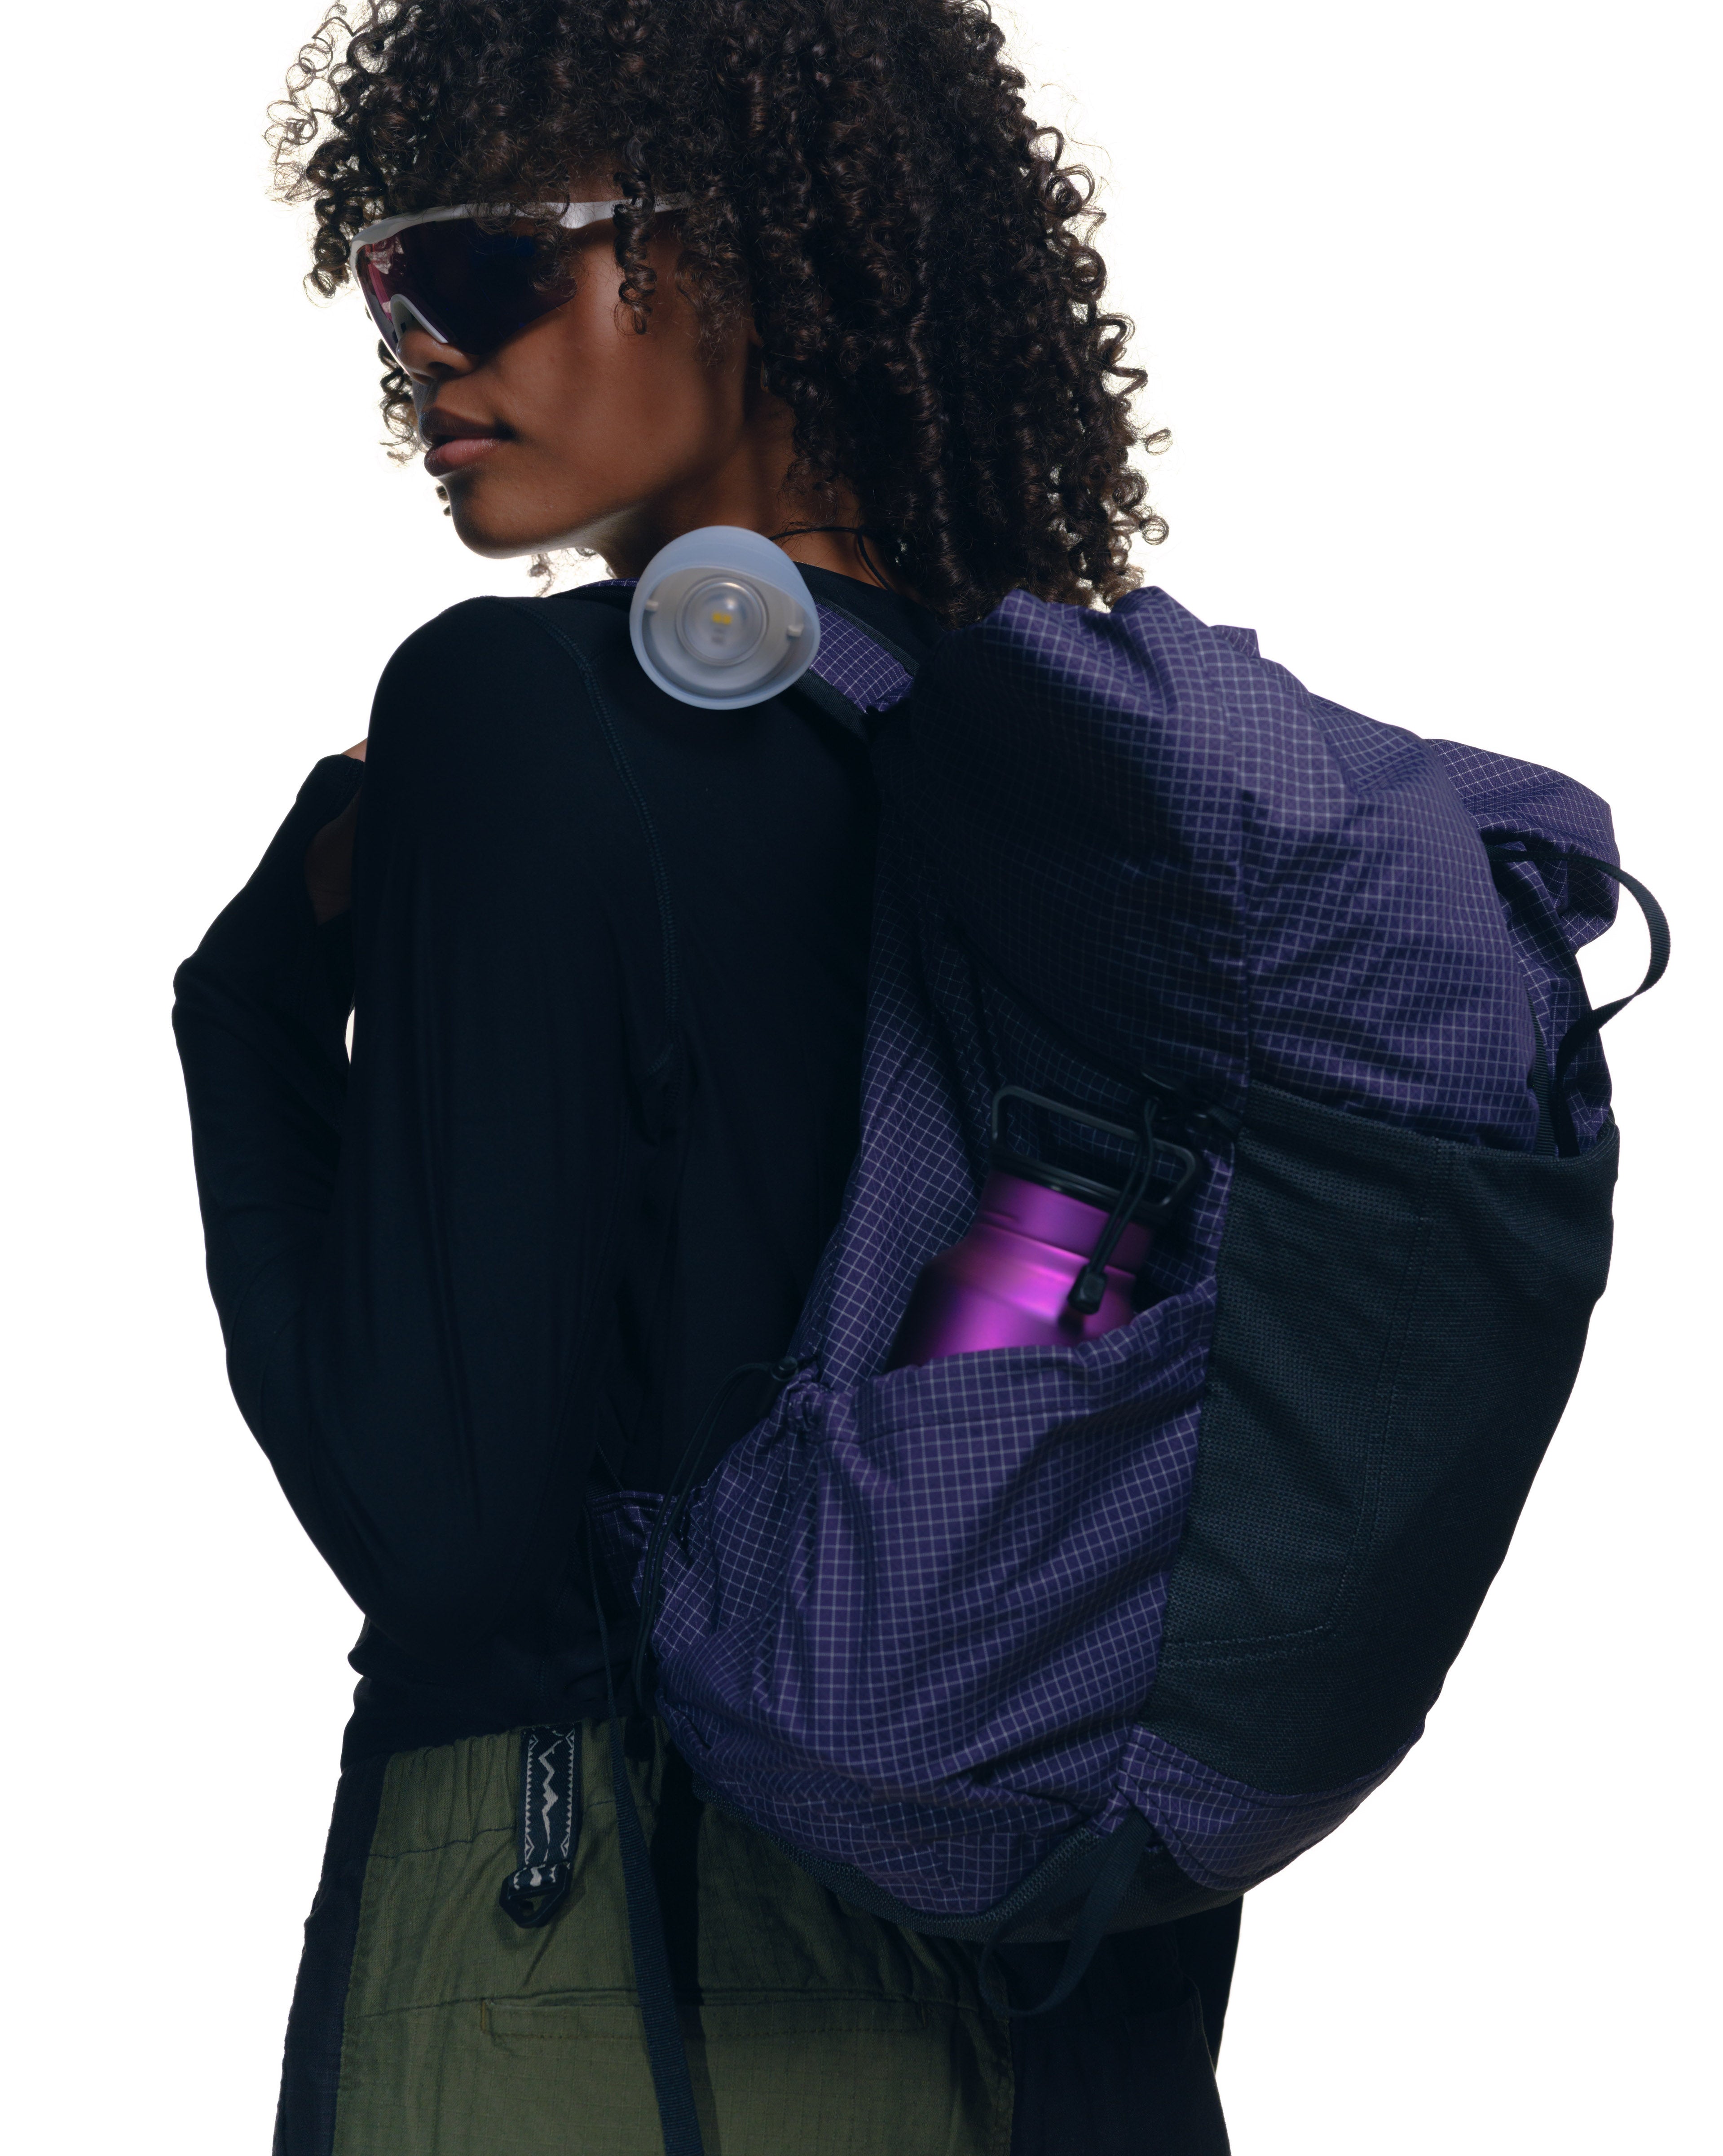 A woman wearing a Pa'lante Desert Pack with Snow Peak accessories and a District Vision top with Manastash pants and Alba Mantra sunglasses